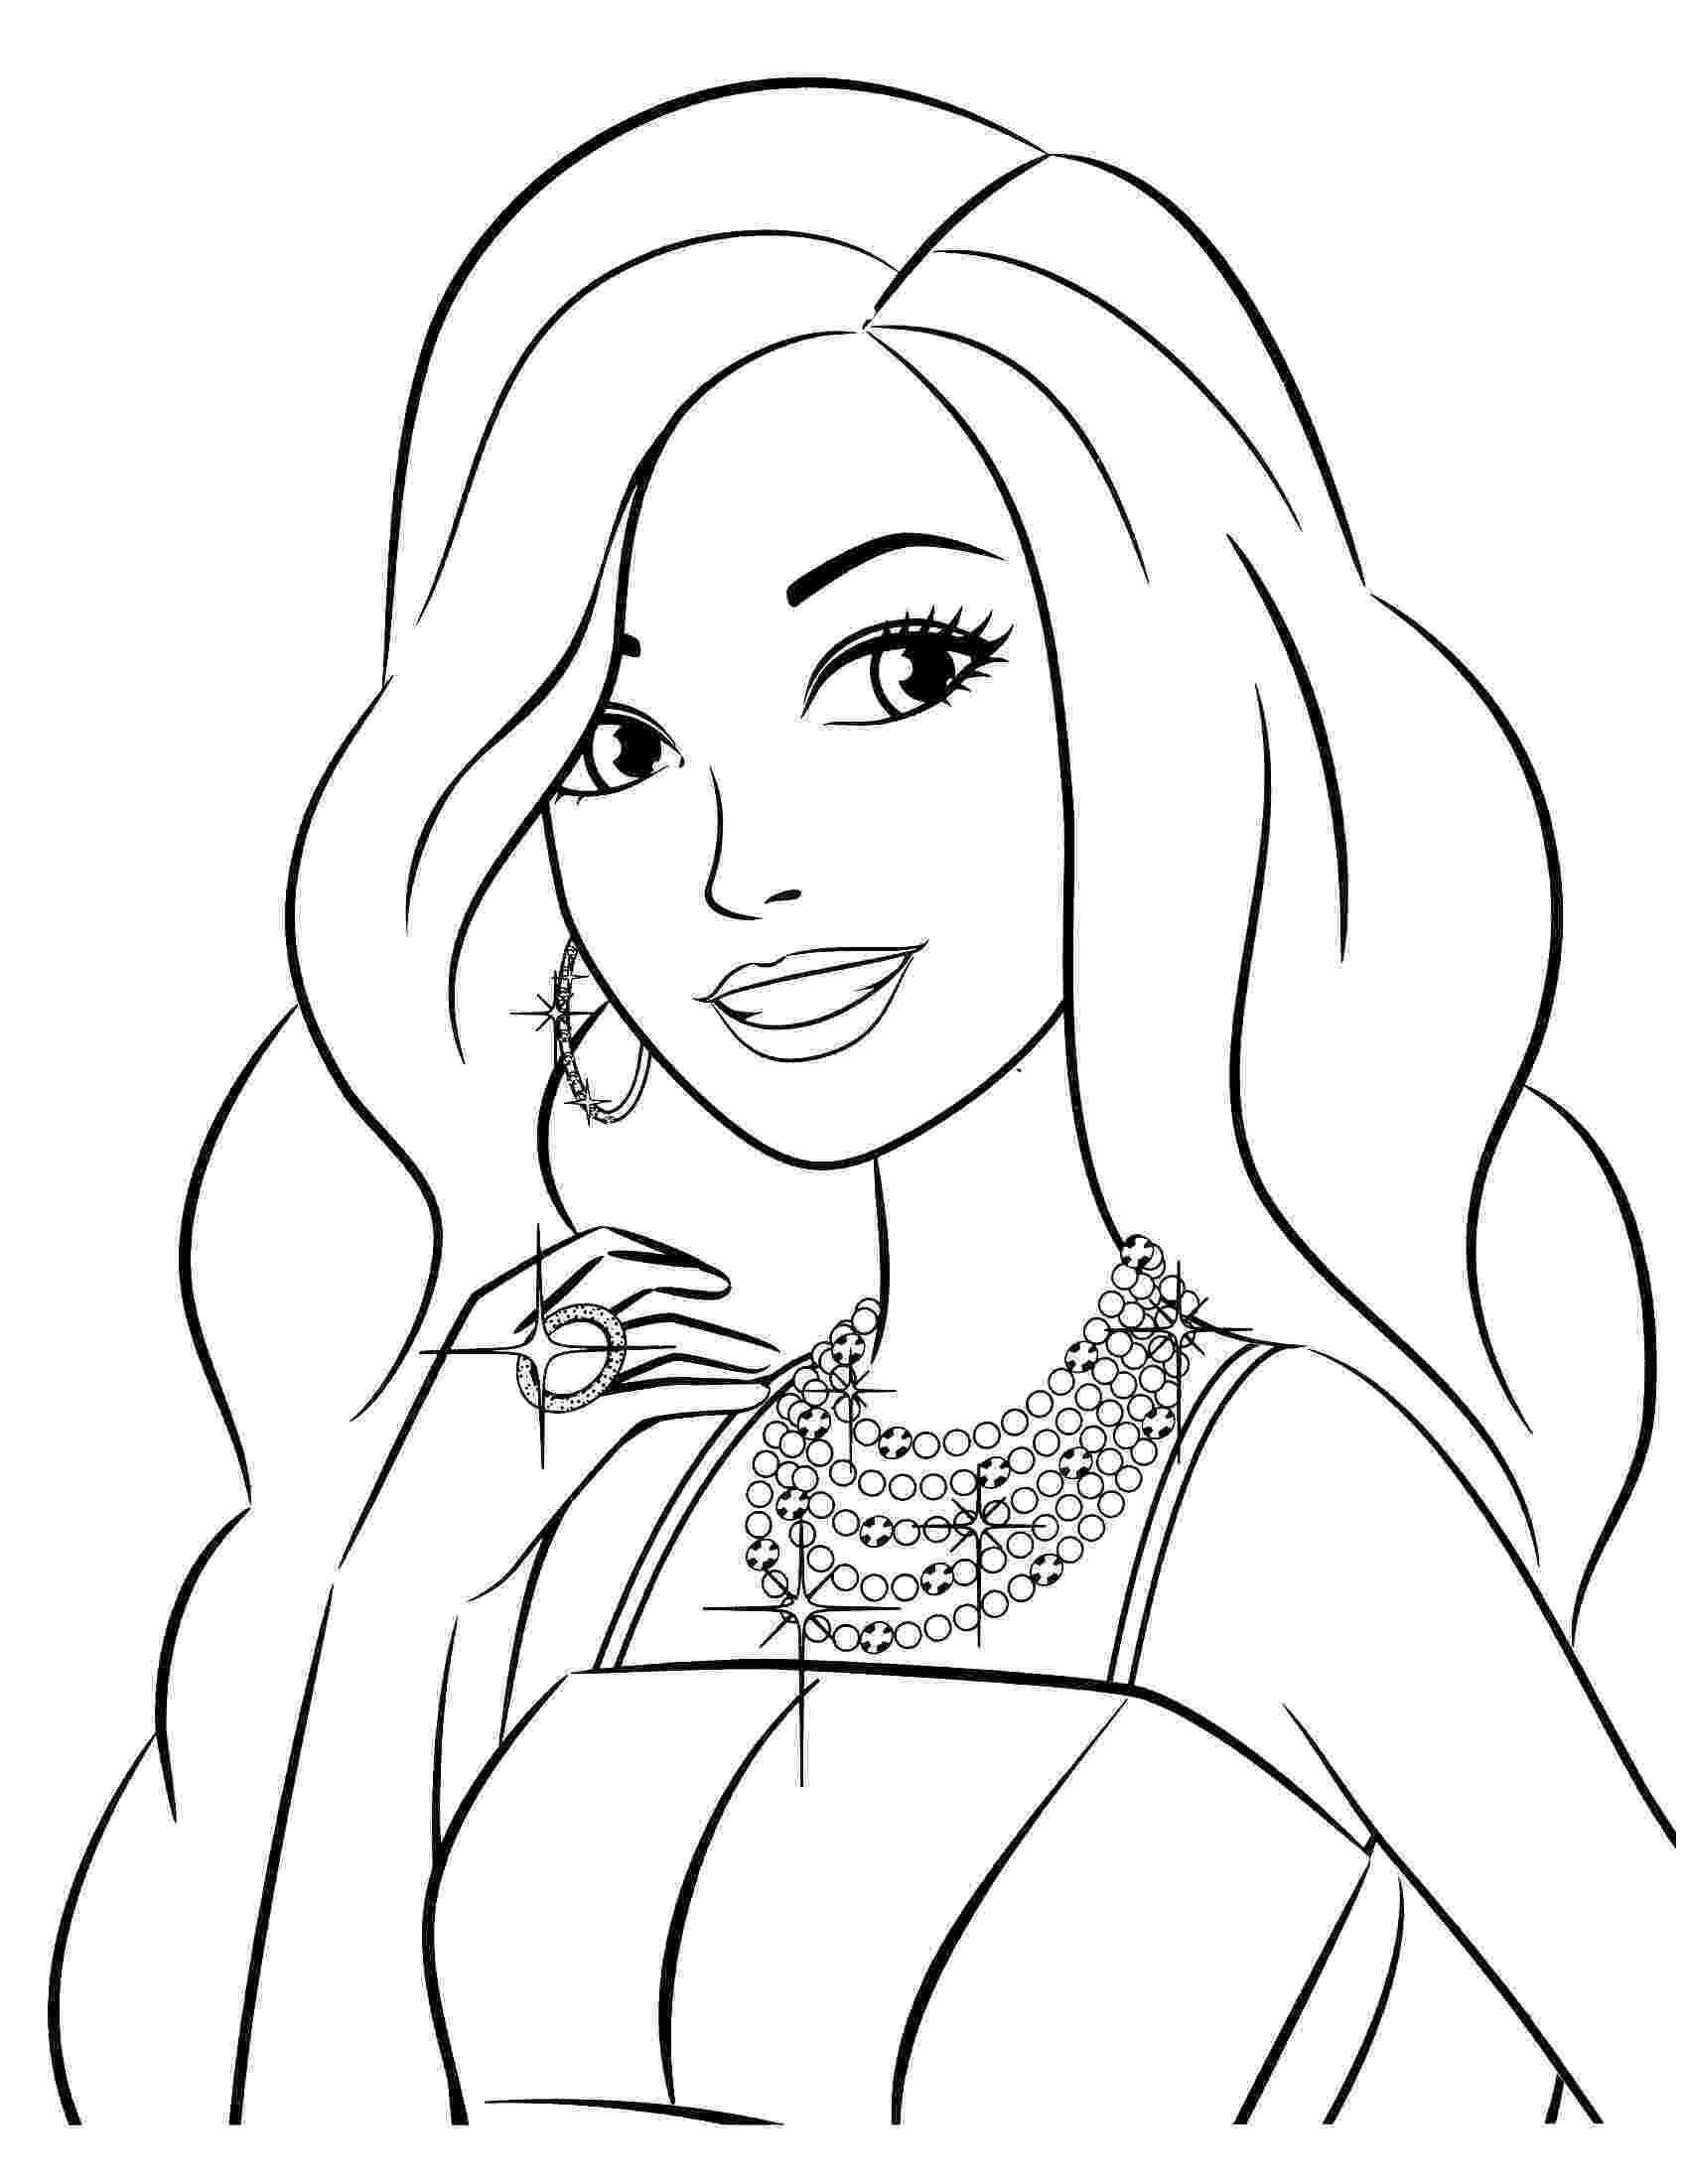 barbie sketch for colouring barbie drawing at getdrawings free download for colouring barbie sketch 